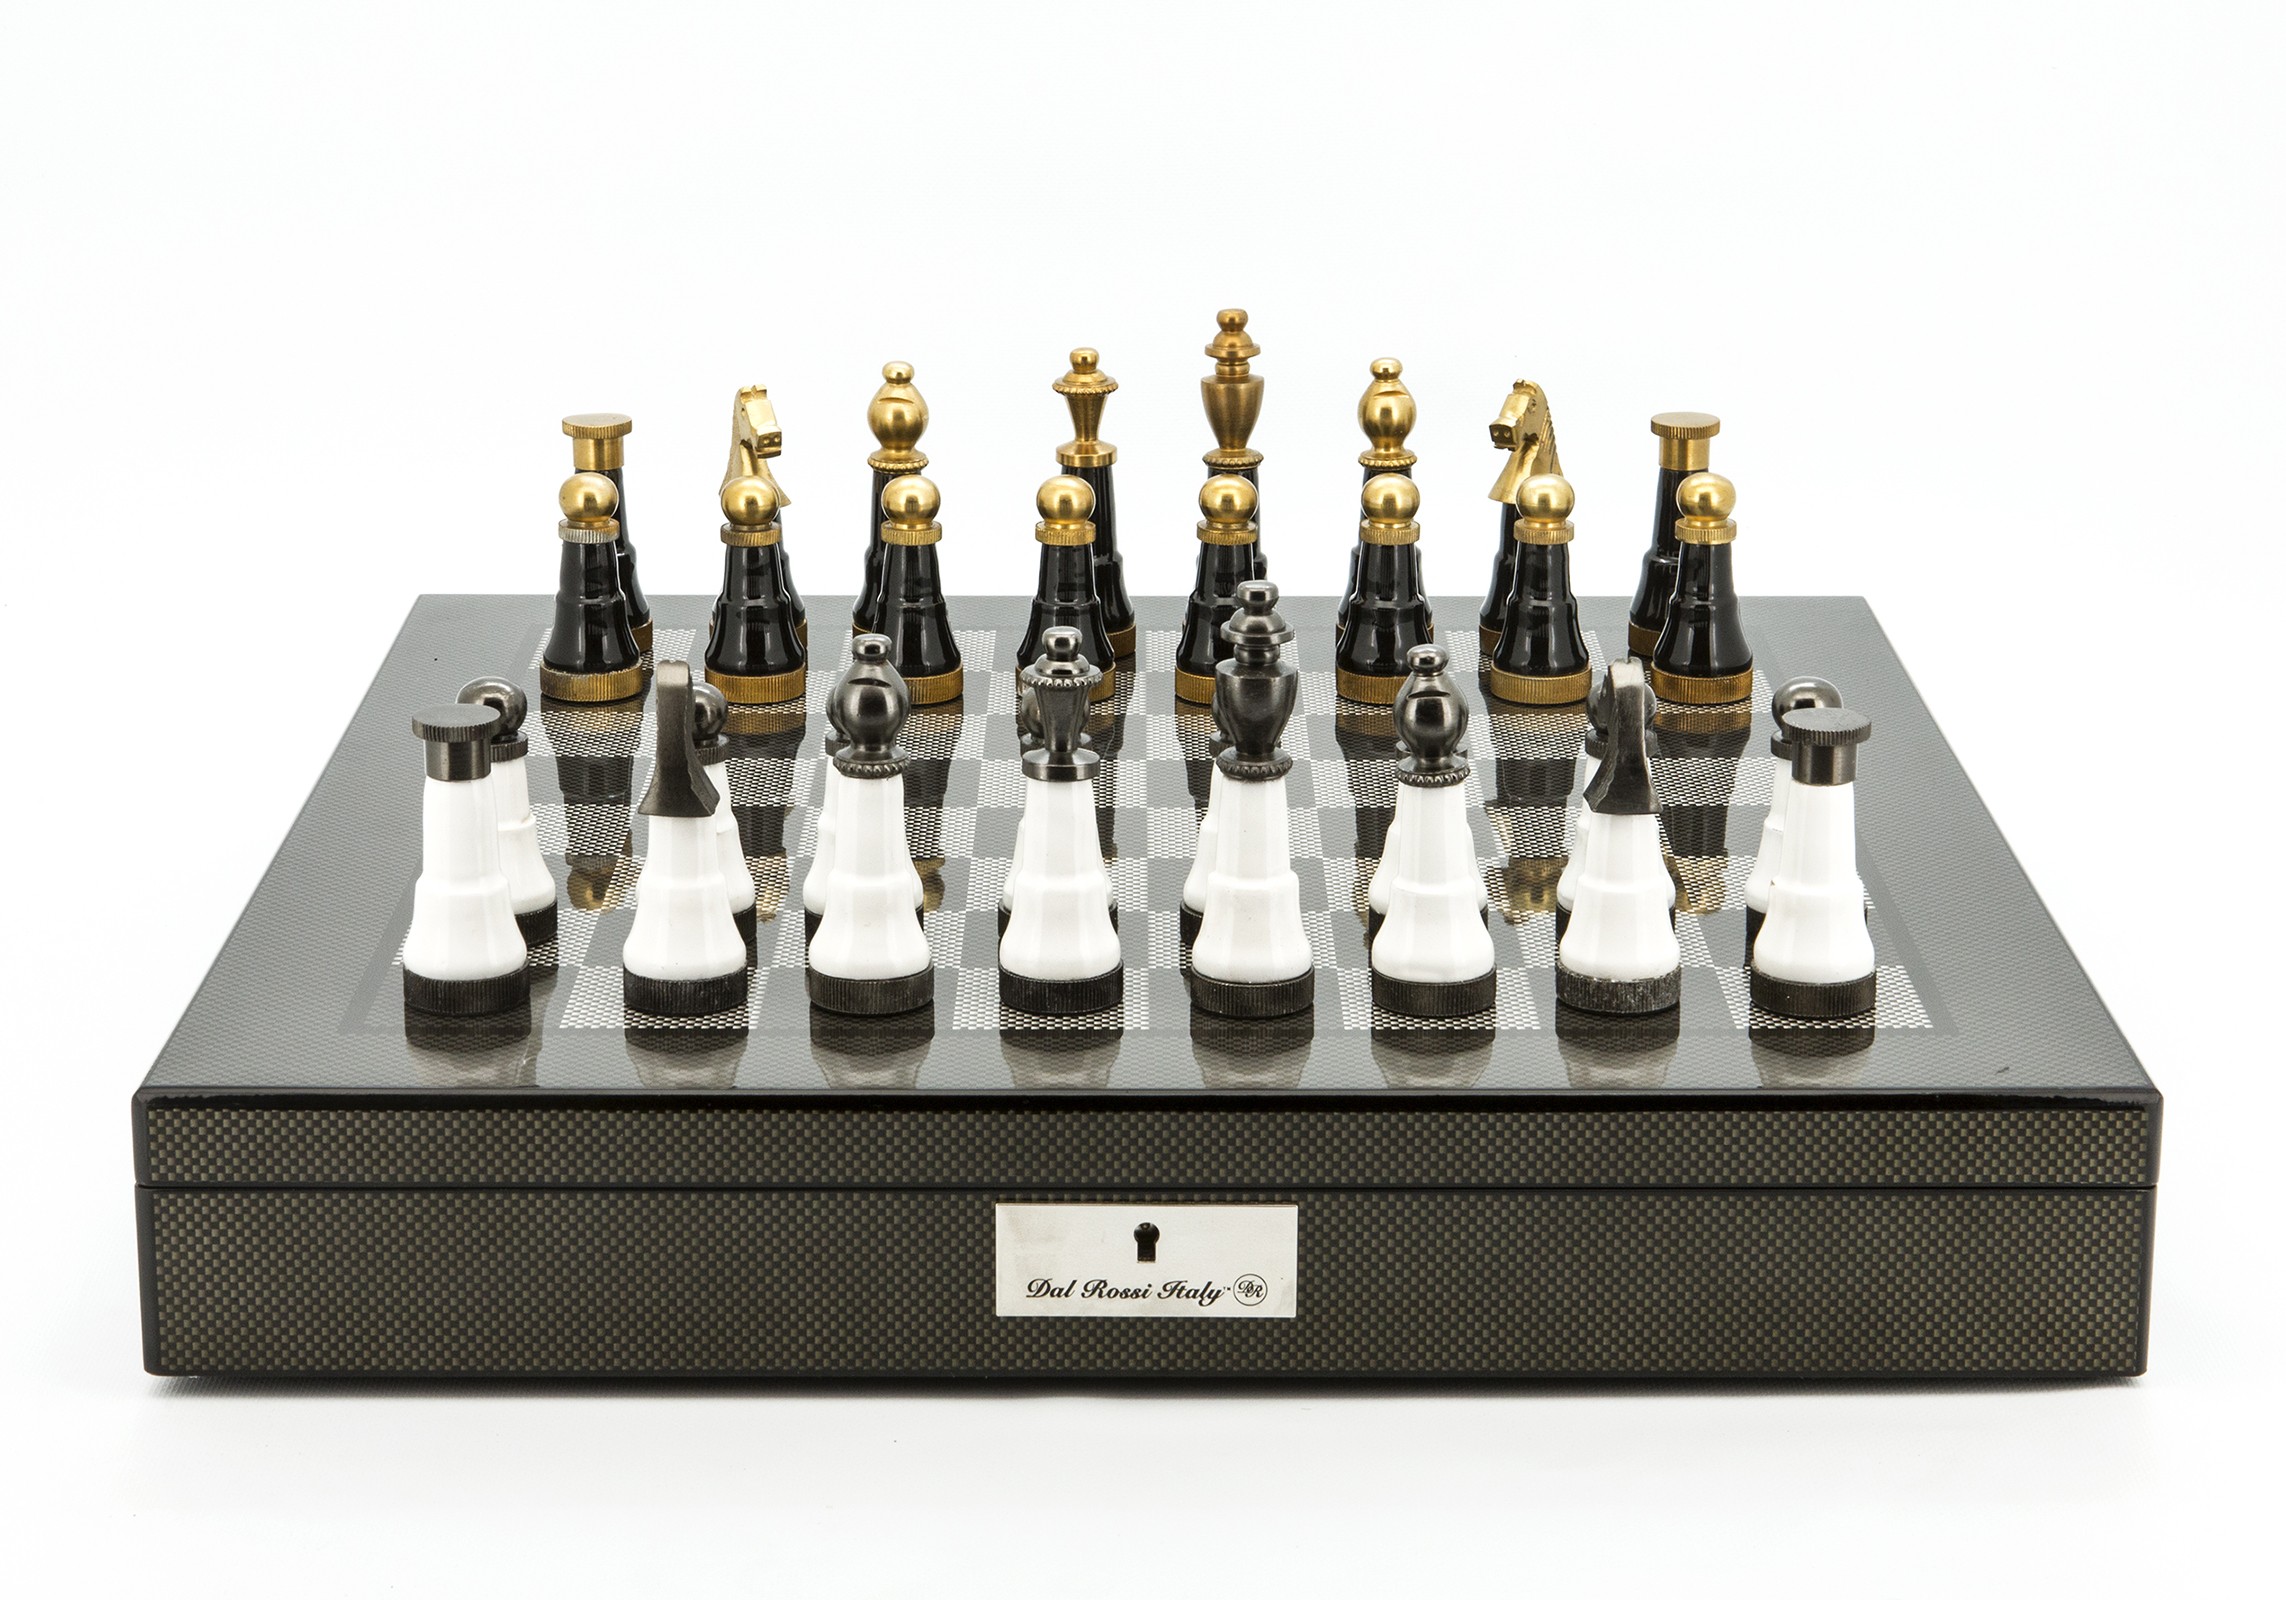 Dal Rossi Italy Chess Set Carbon Fibre Shinny Finish 20″ With Compartments, With Black and White with Gold and Gun Metal Tops and Bottoms Chessmen 110mm 